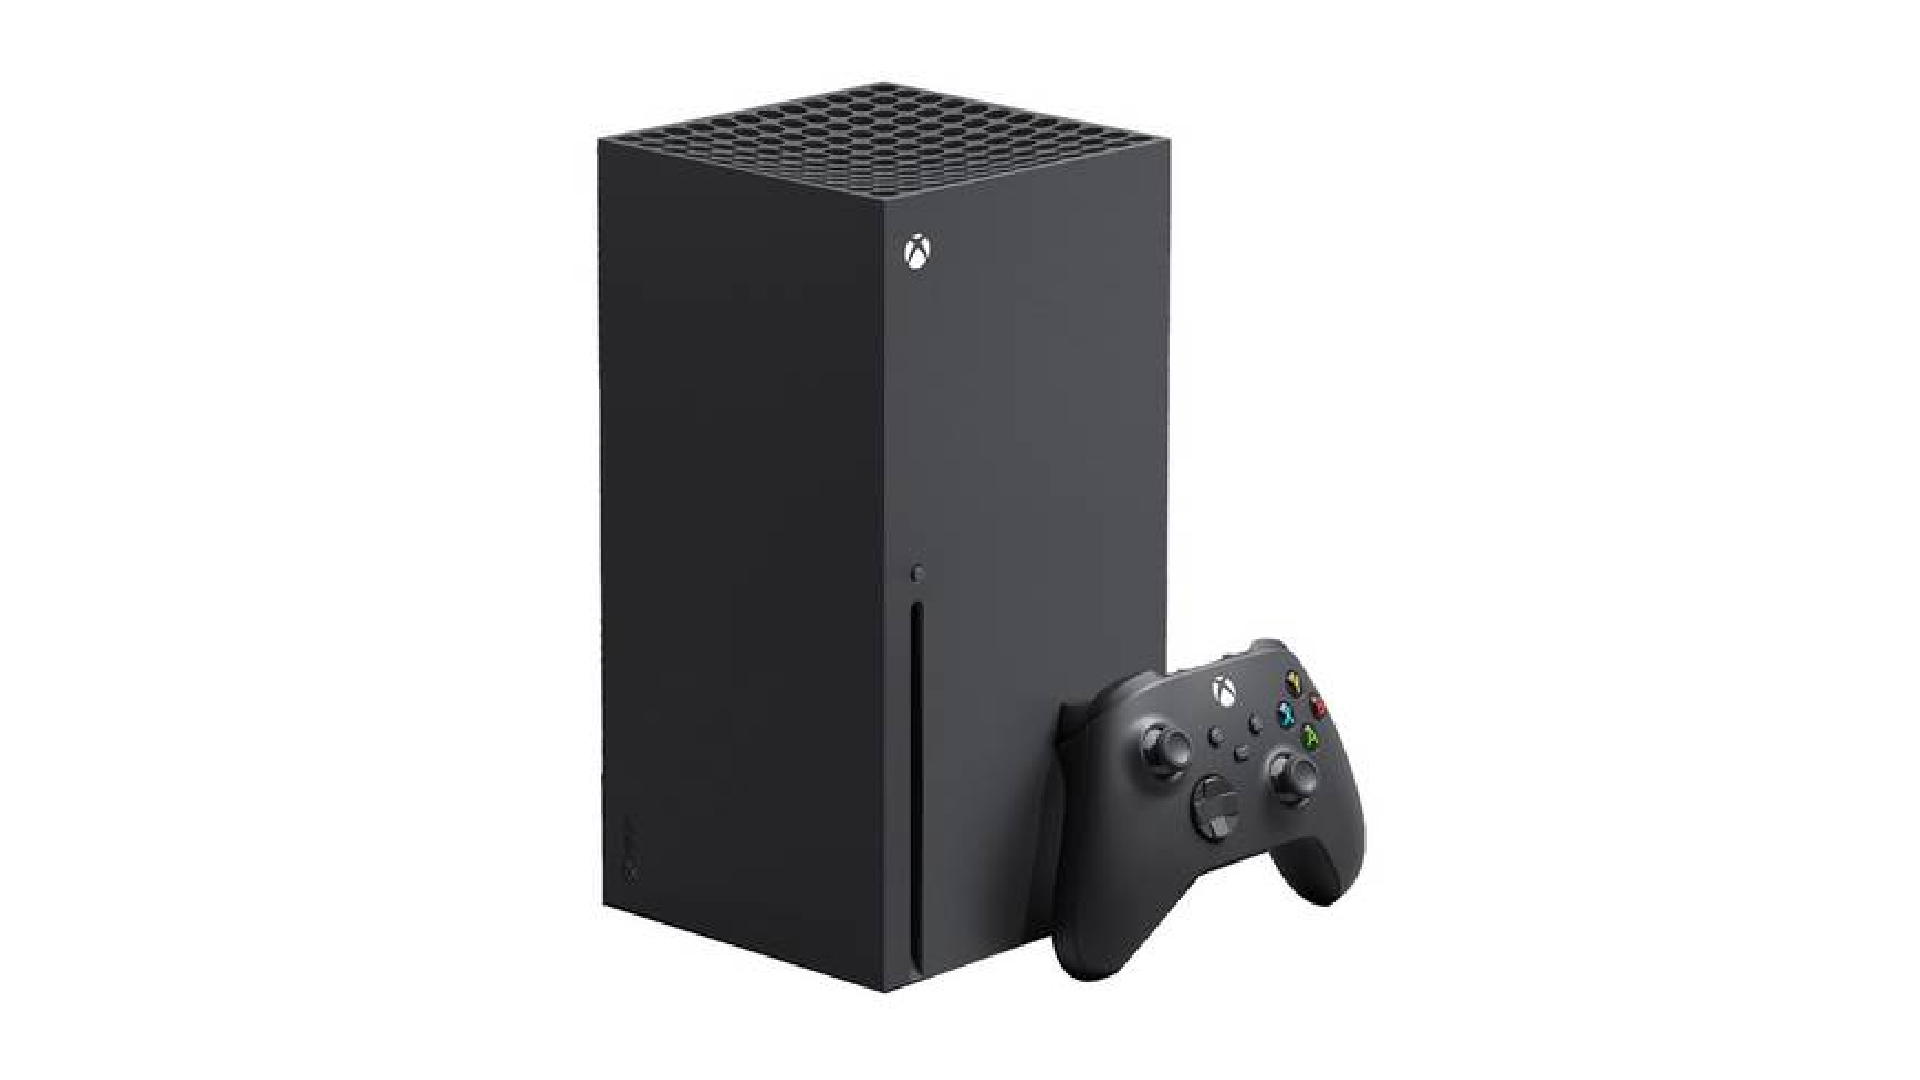 Image for Pick up an Xbox Series X for £429 today from Very and Amazon